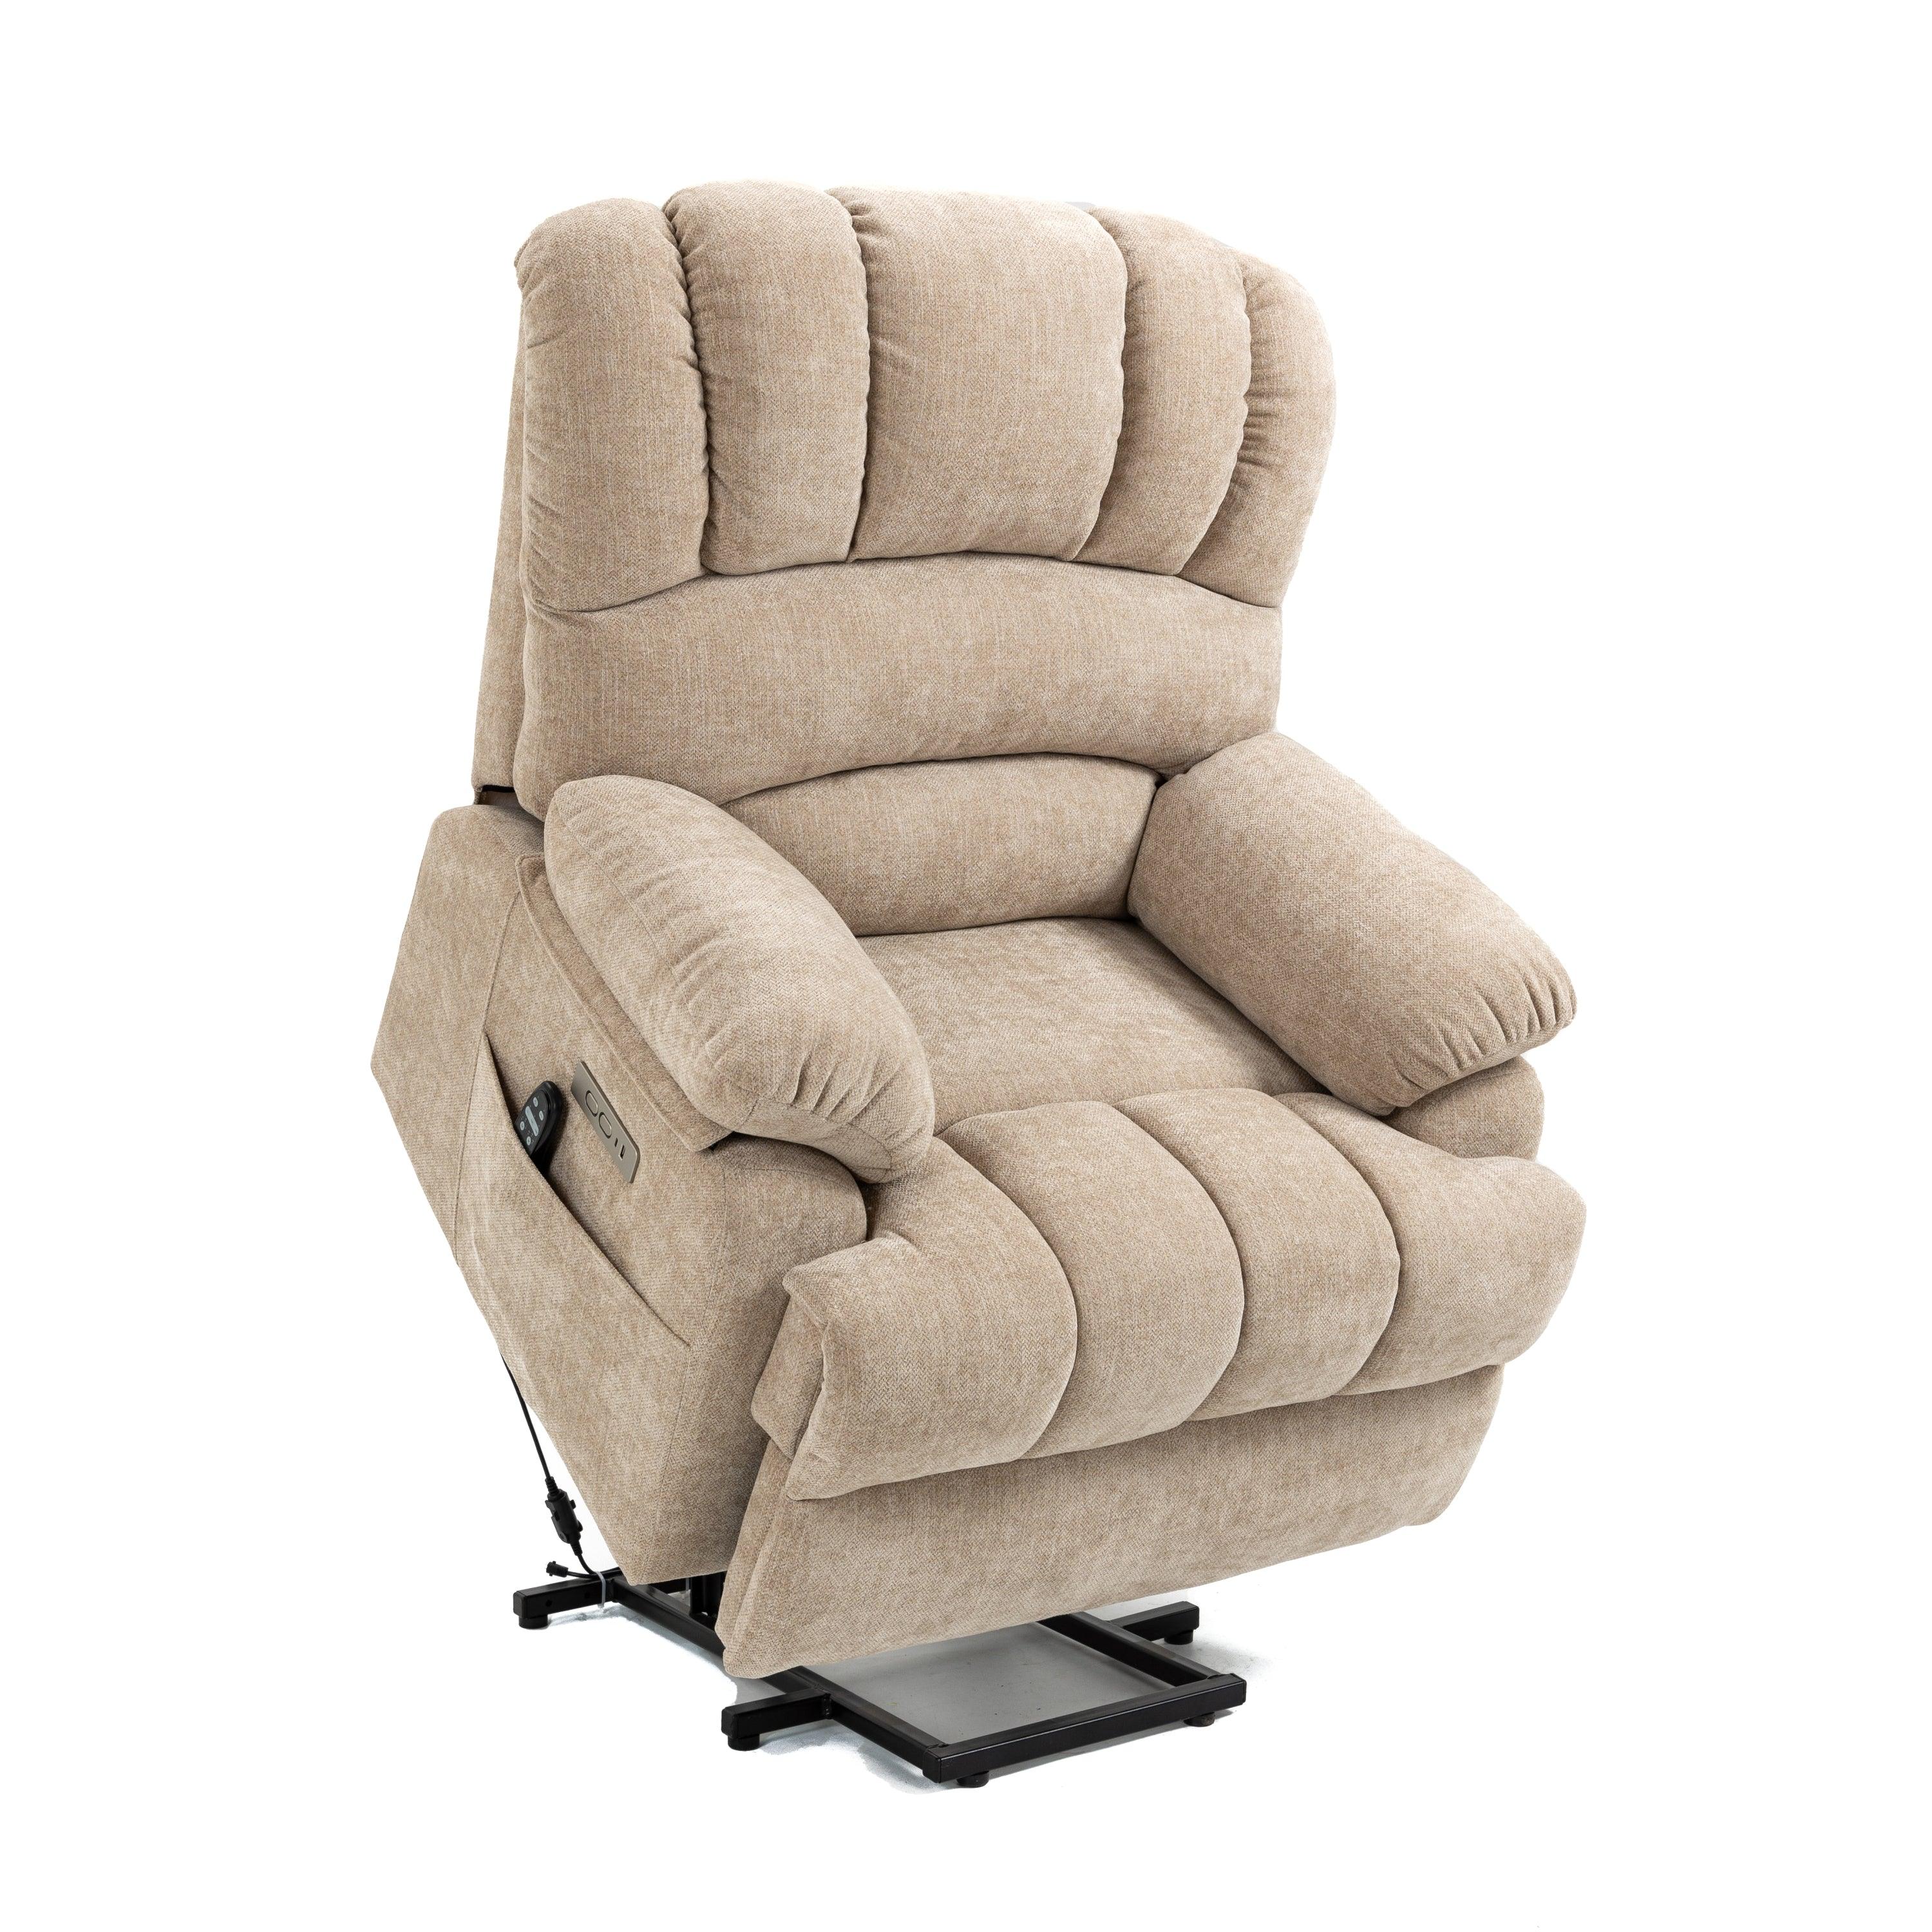 Large Power Lift Recliner Chair with Heat and Massage, raised, angle